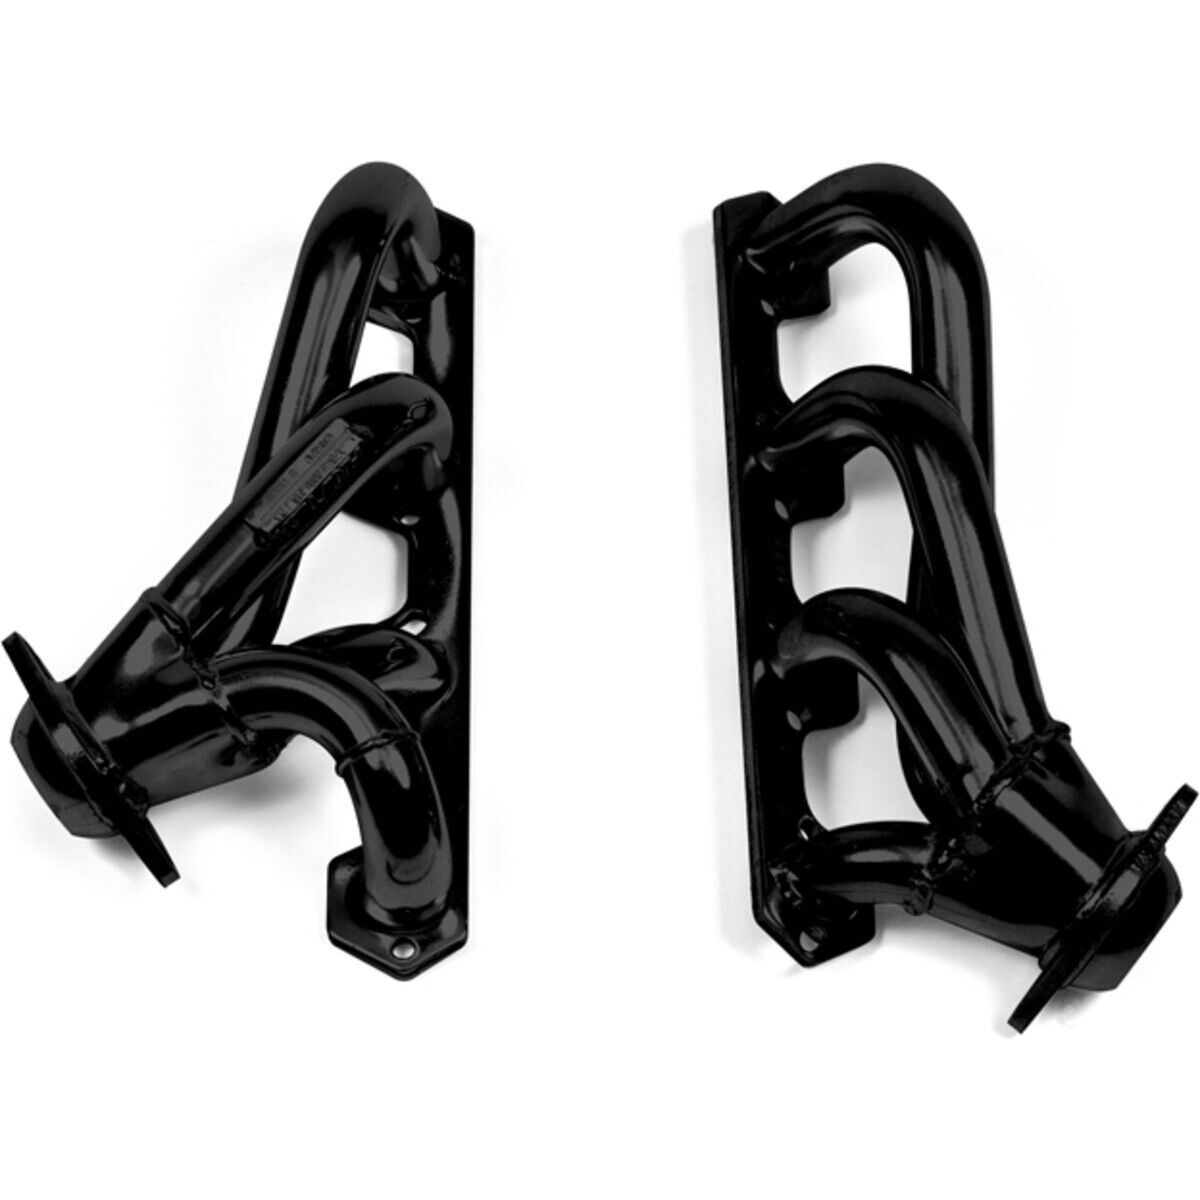 91627FLT Flowtech Set of 2 Headers for F150 Truck F250 Ford F-150 F-250 Pair